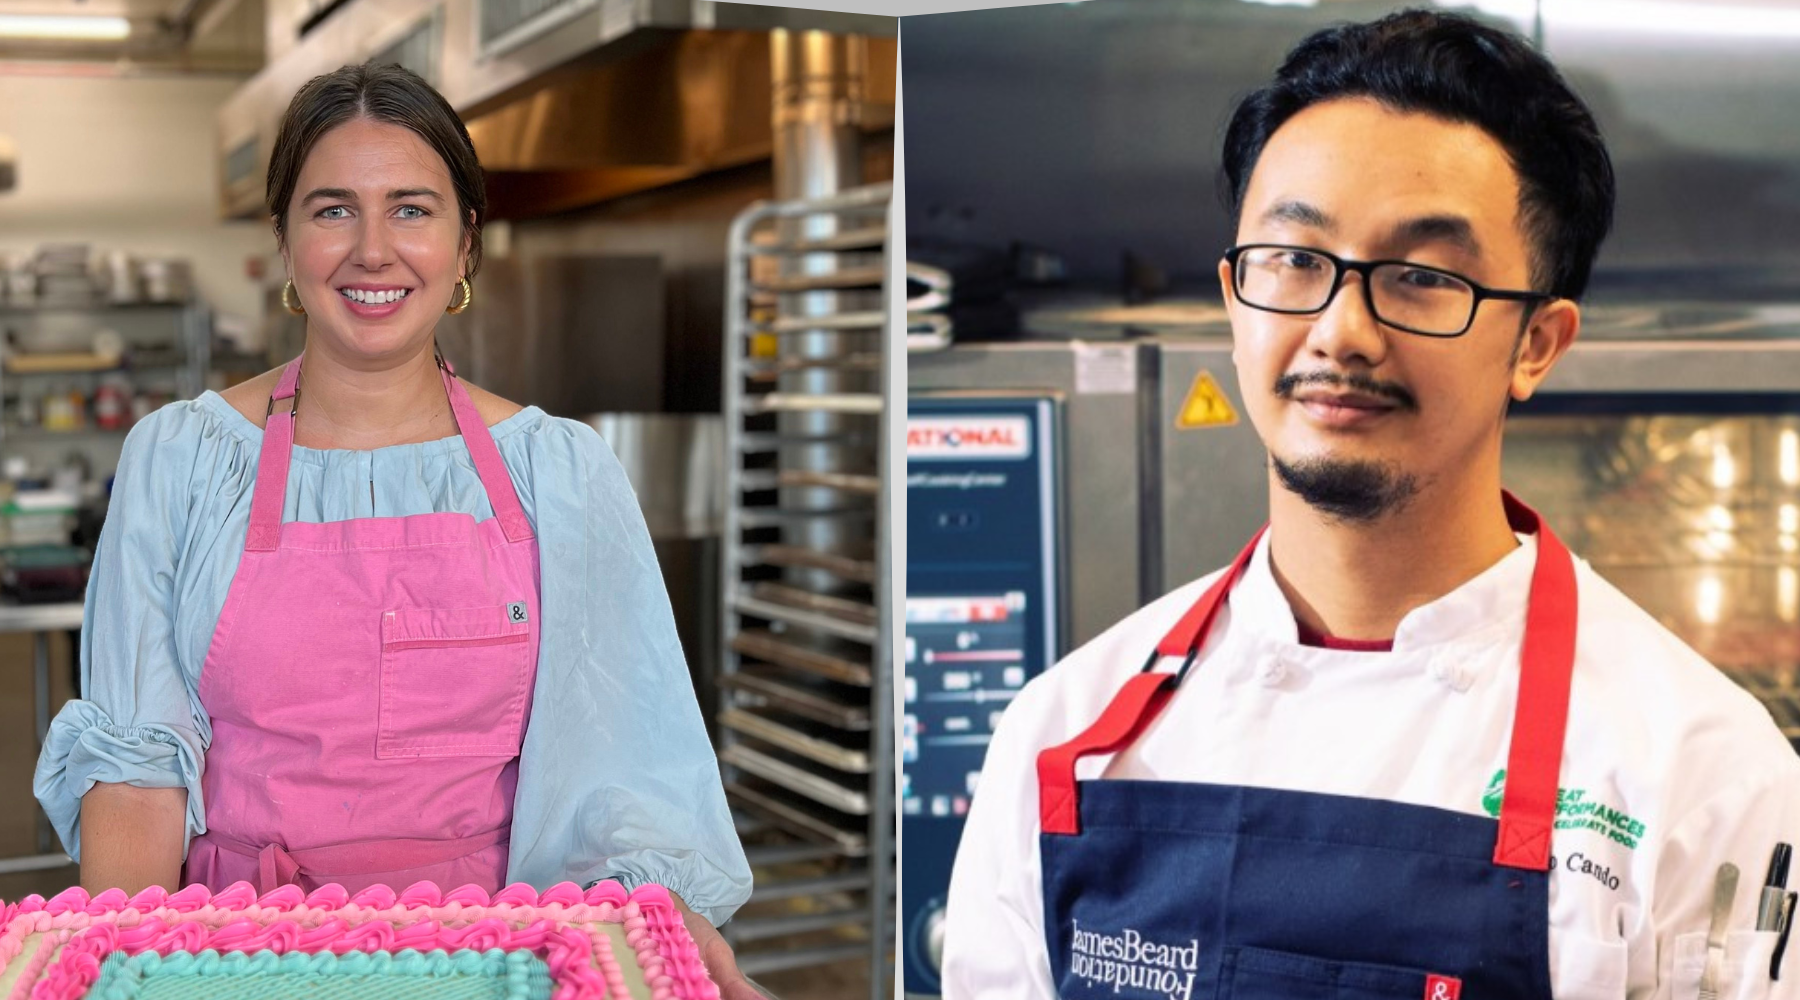 2023 Main Course Chefs: Highlighting Noelle Wheatley Blizzard of New June Bakery & Jacob Trinh of Càphê Roasters